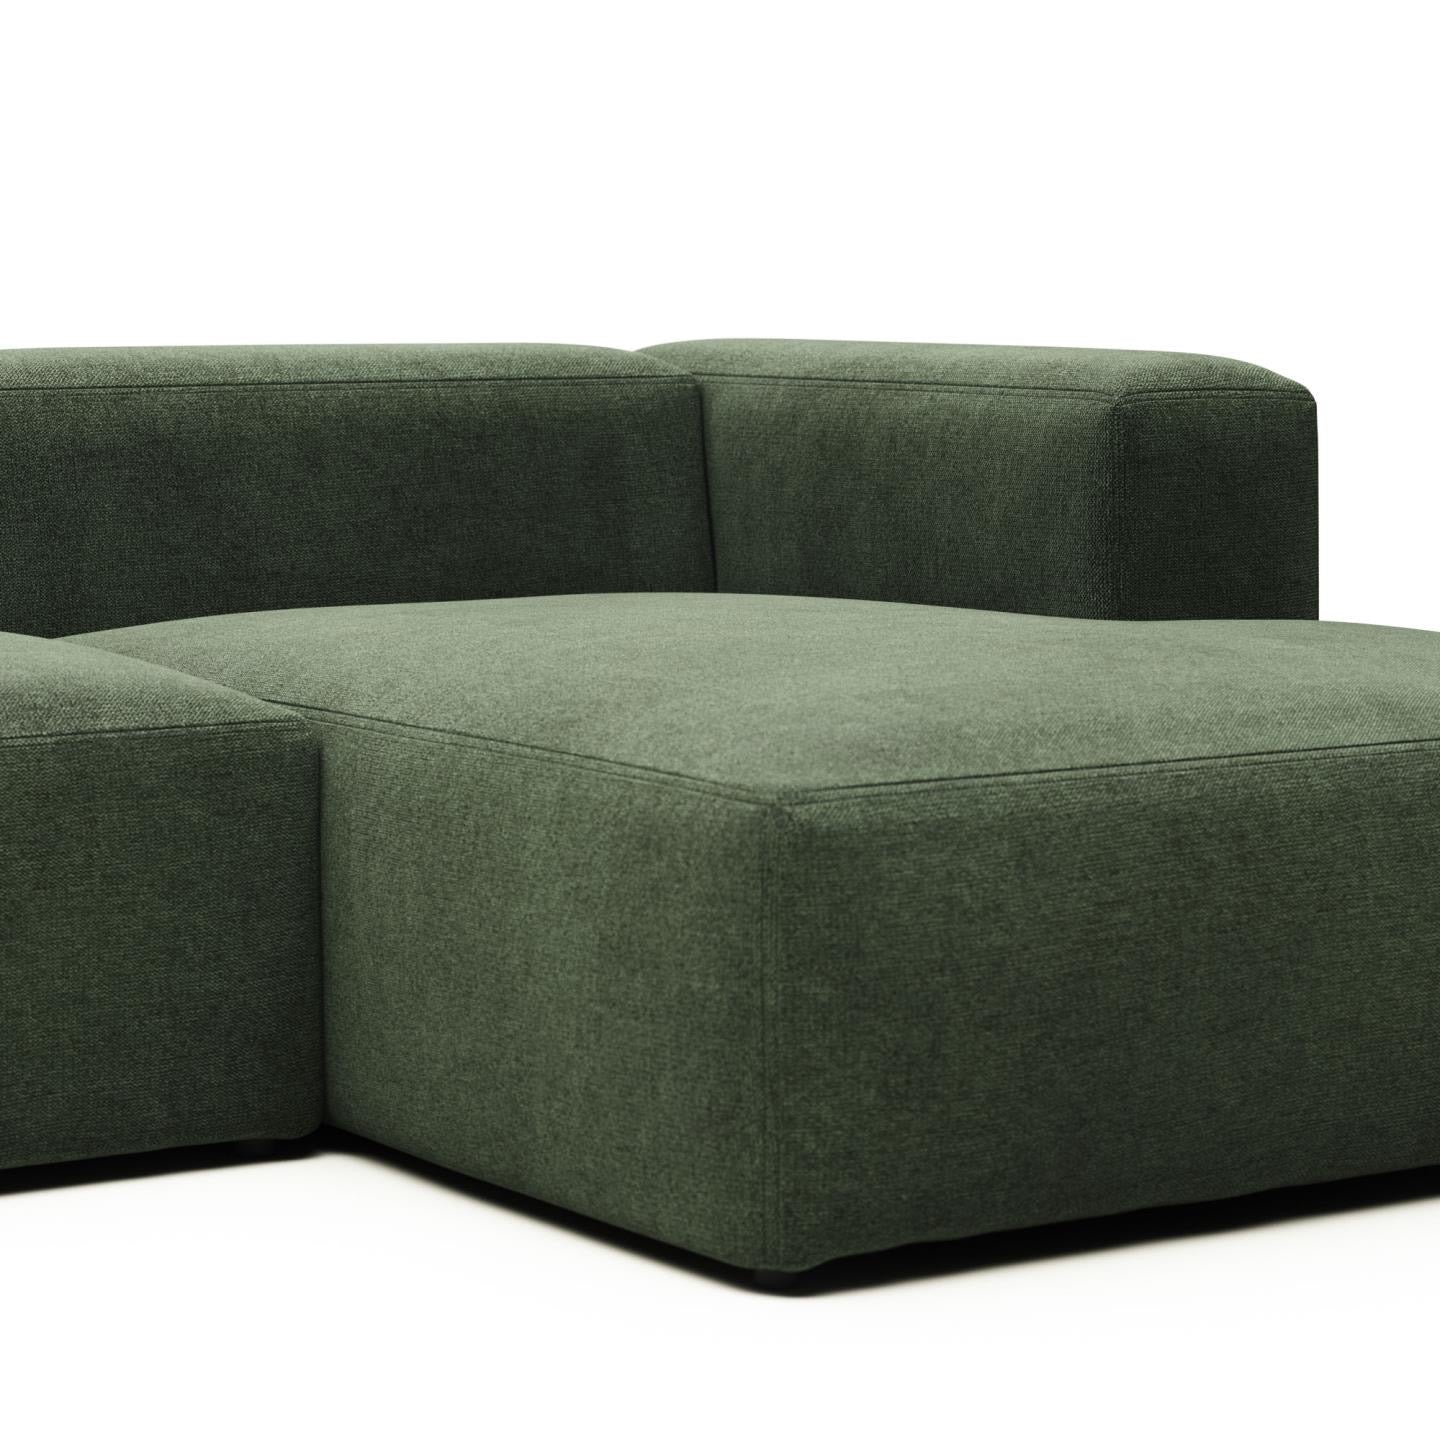 Lund 4 Seater Sofa with Right Side Chaise - Green